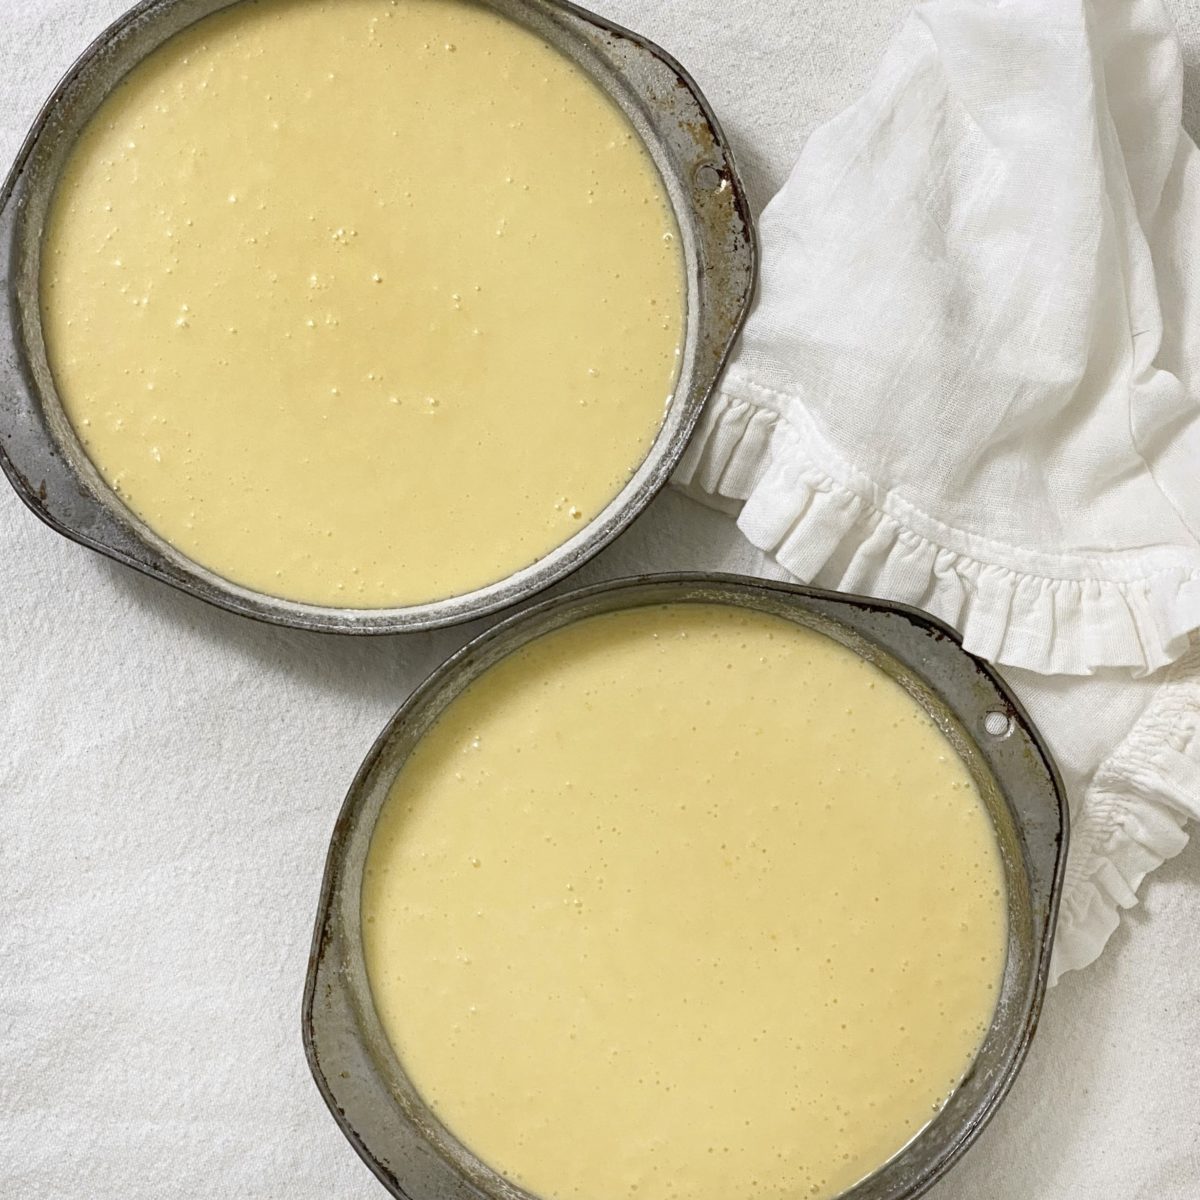 Two cake pans with and even amount of cake batter in them.